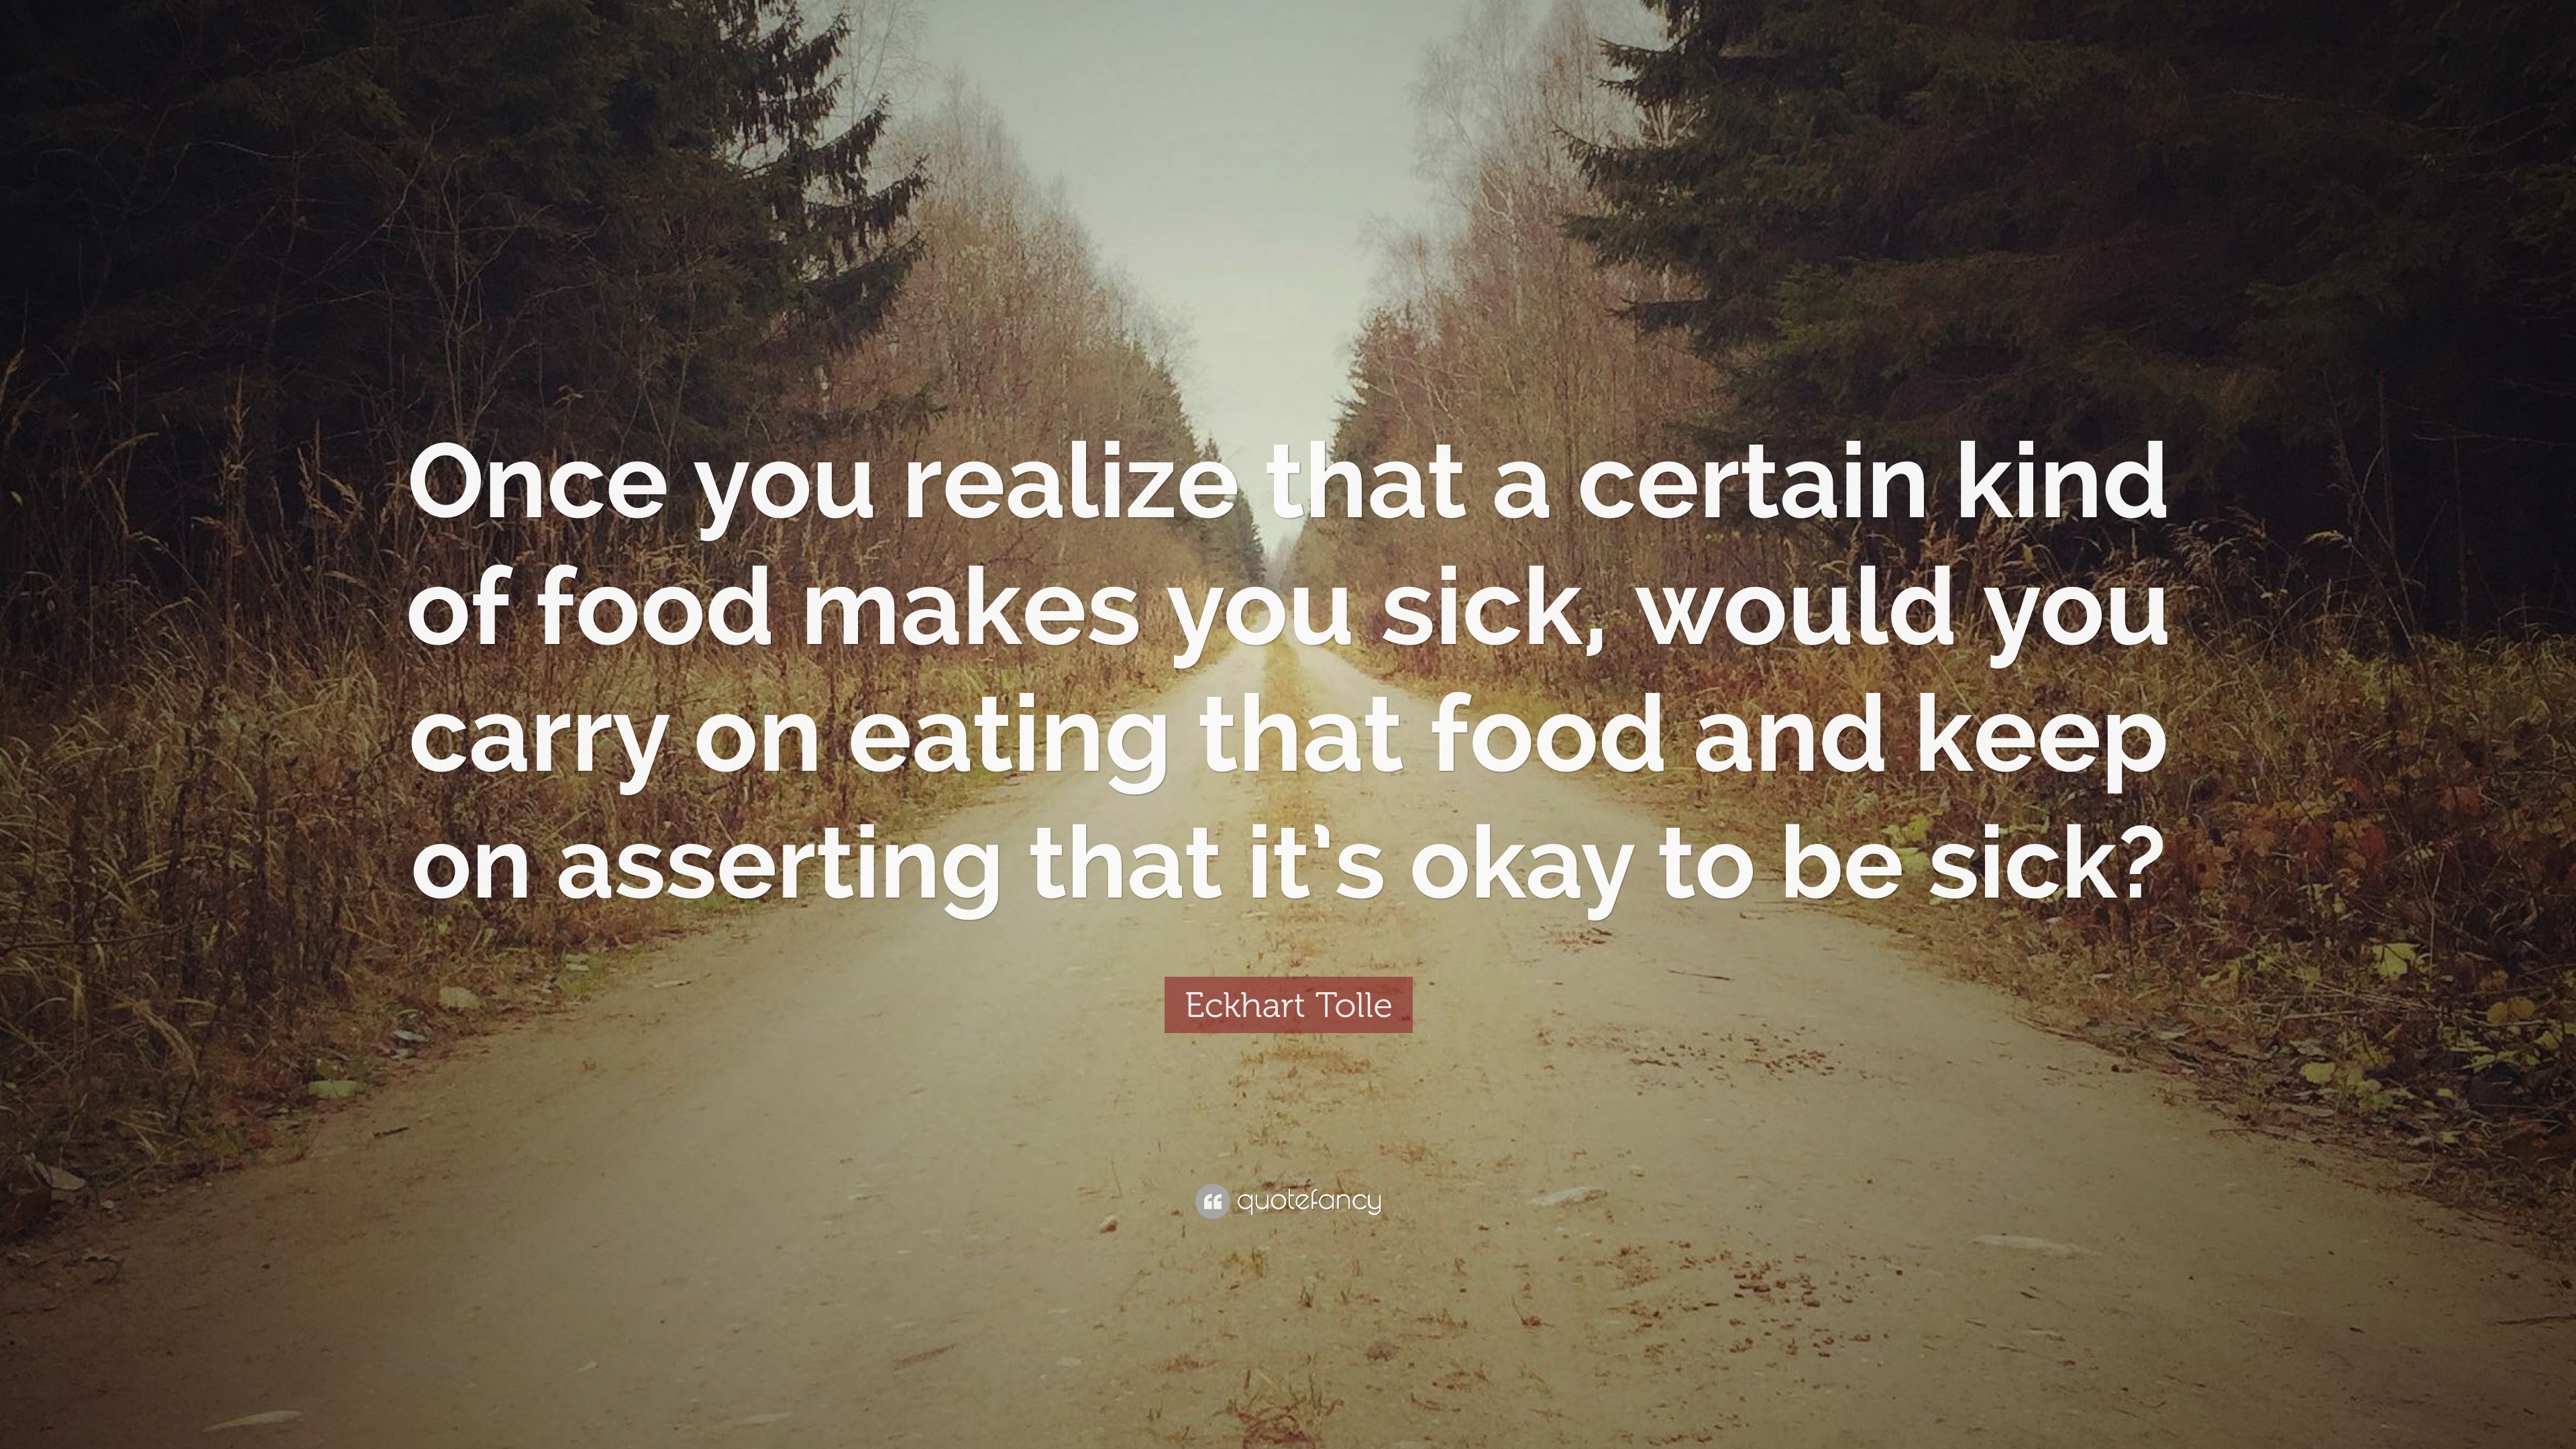 Eckhart Tolle Quote: “Once you realize that a certain kind of food ...